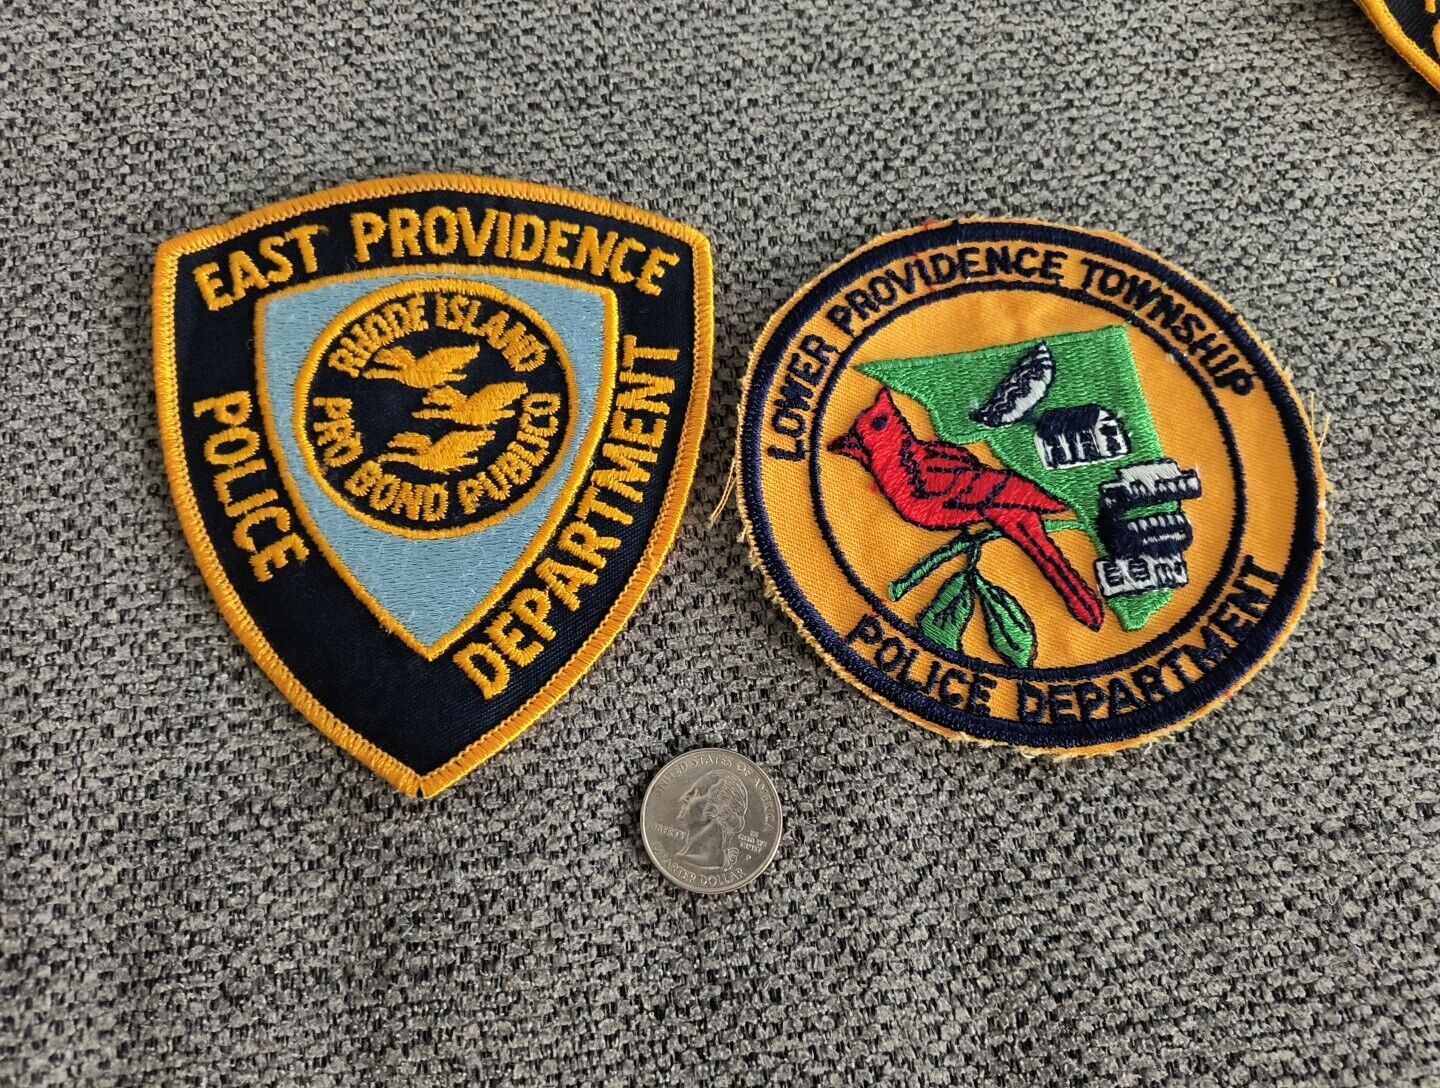 East Providence & Lower Providence Rhode Island Police Patch Set Of 2